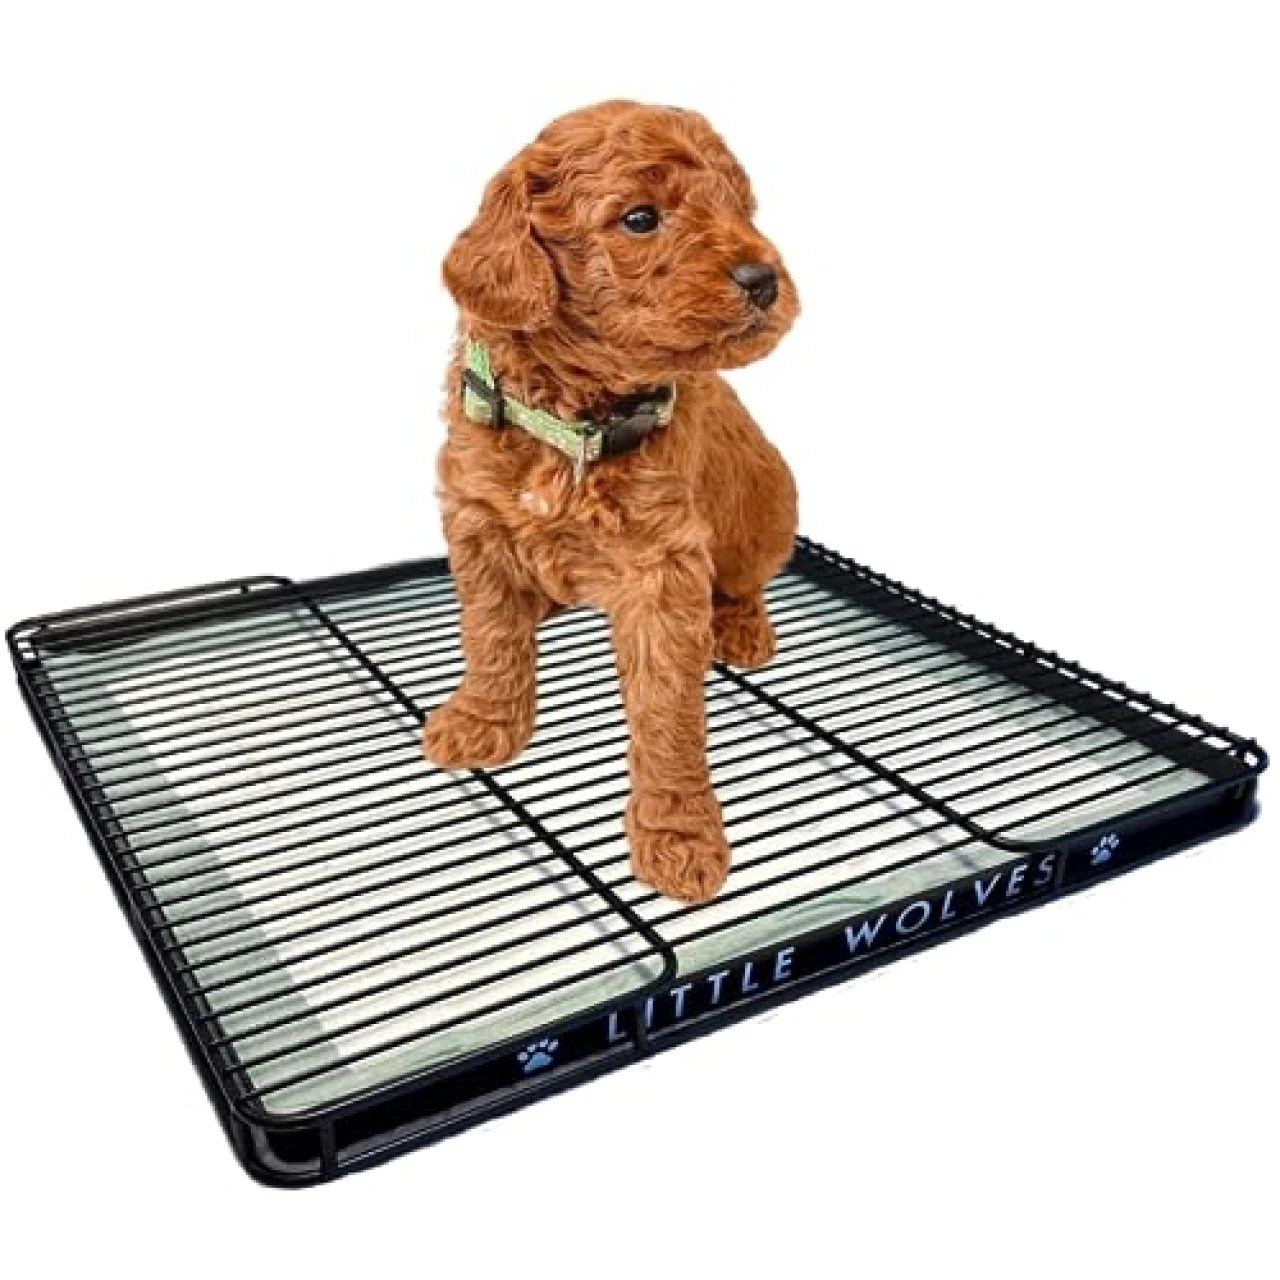 Little Wolves Puppy Potty Tray Essentials: 22x22 Tray w/Dog Pee Pads